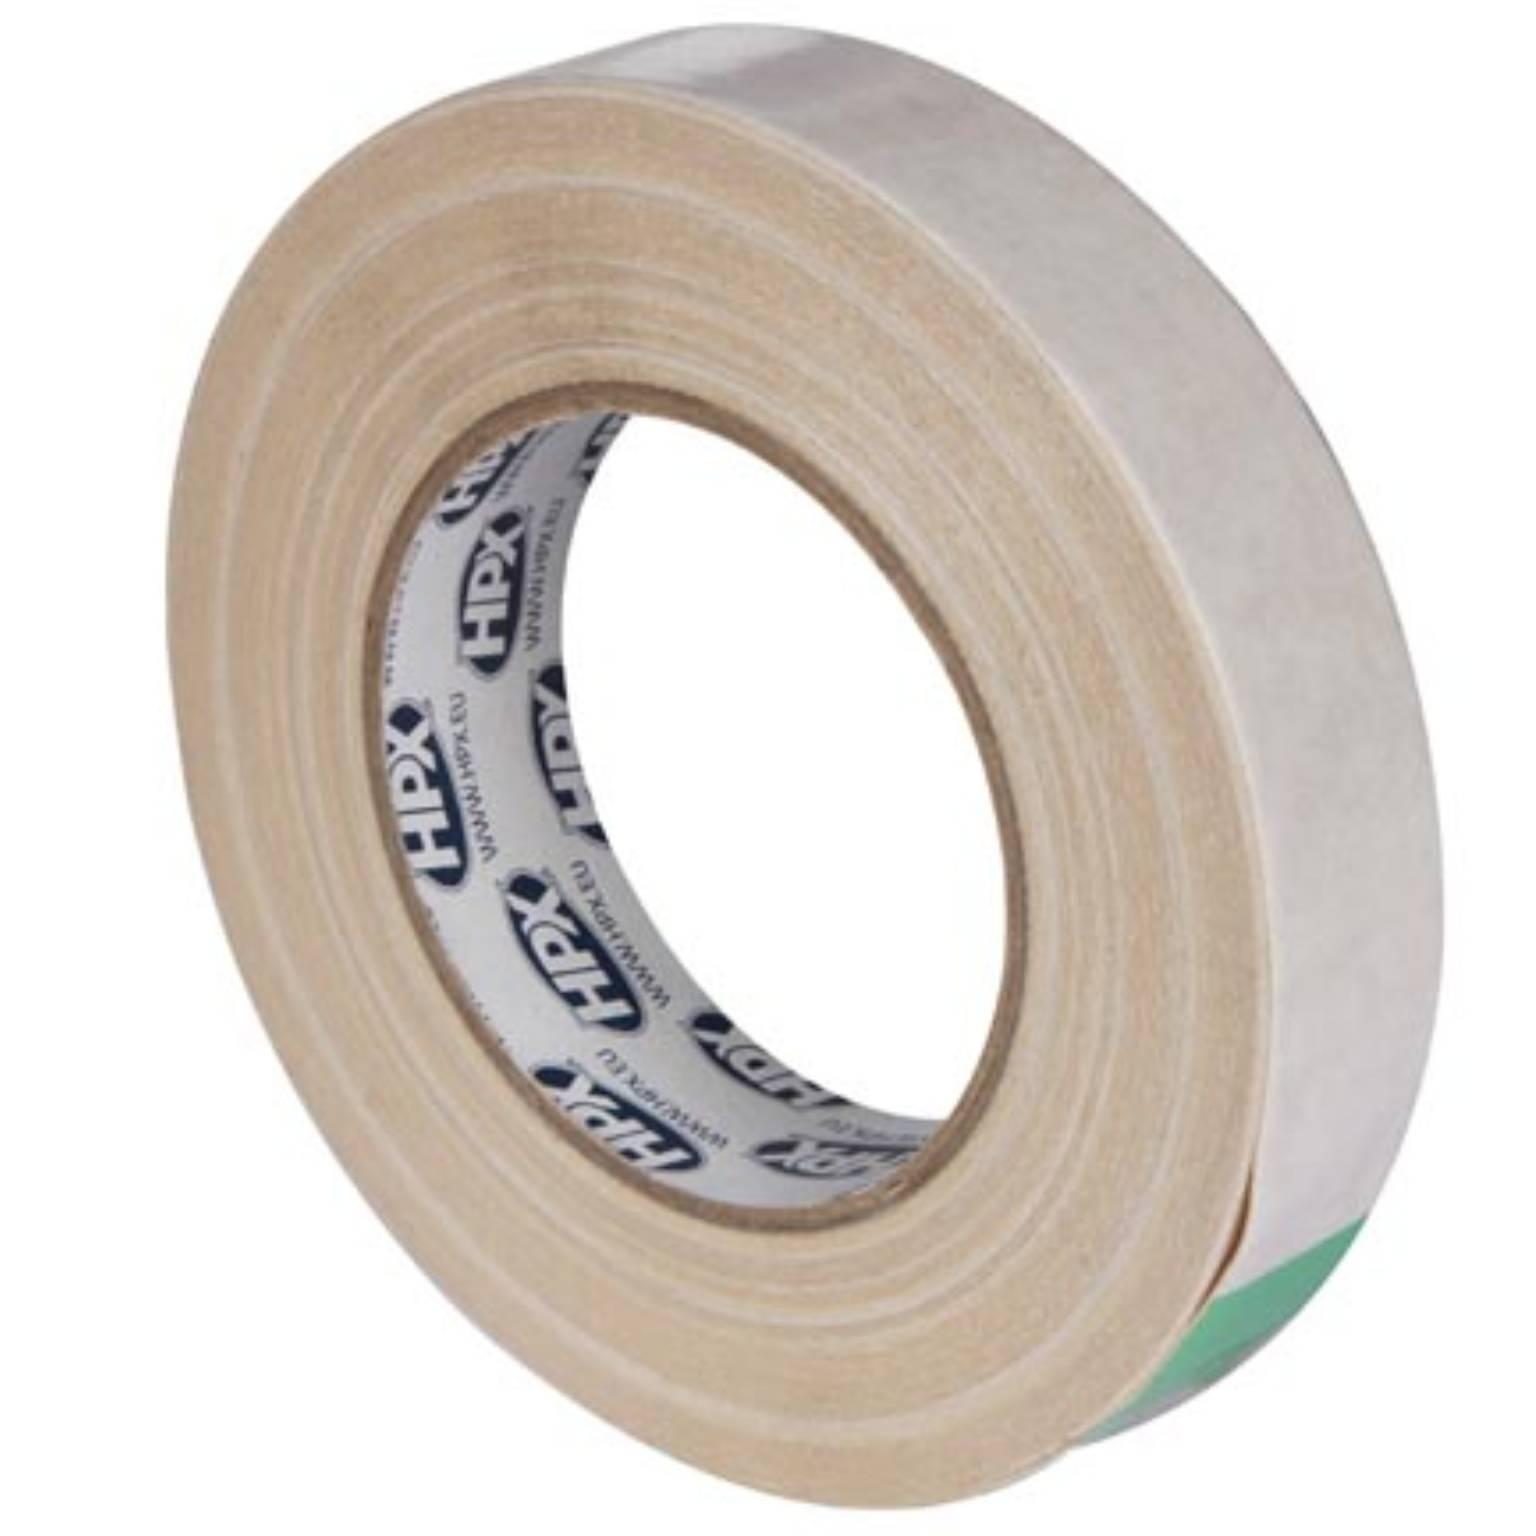 HPX - REMOVABLE EXHIBITION DOUBLE SIDED TAPE (25mm x 50m) - HPX